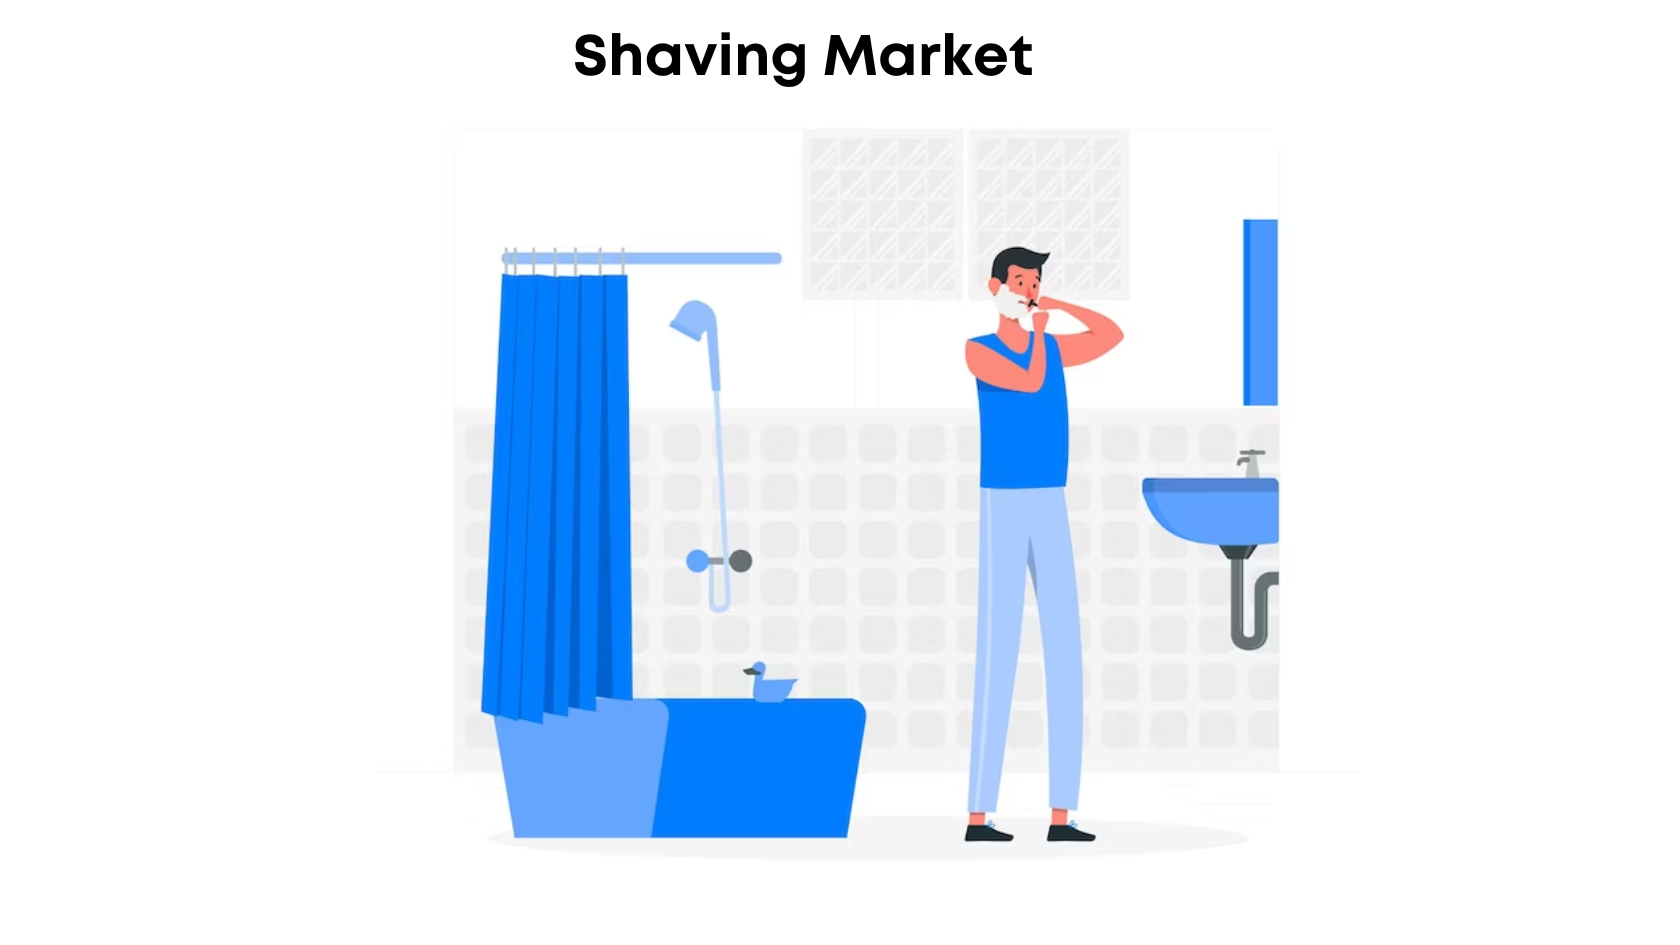 Shaving Market Growth (USD 13.5 billion by 2032 at 5.4% CAGR) Global Analysis by Market.us